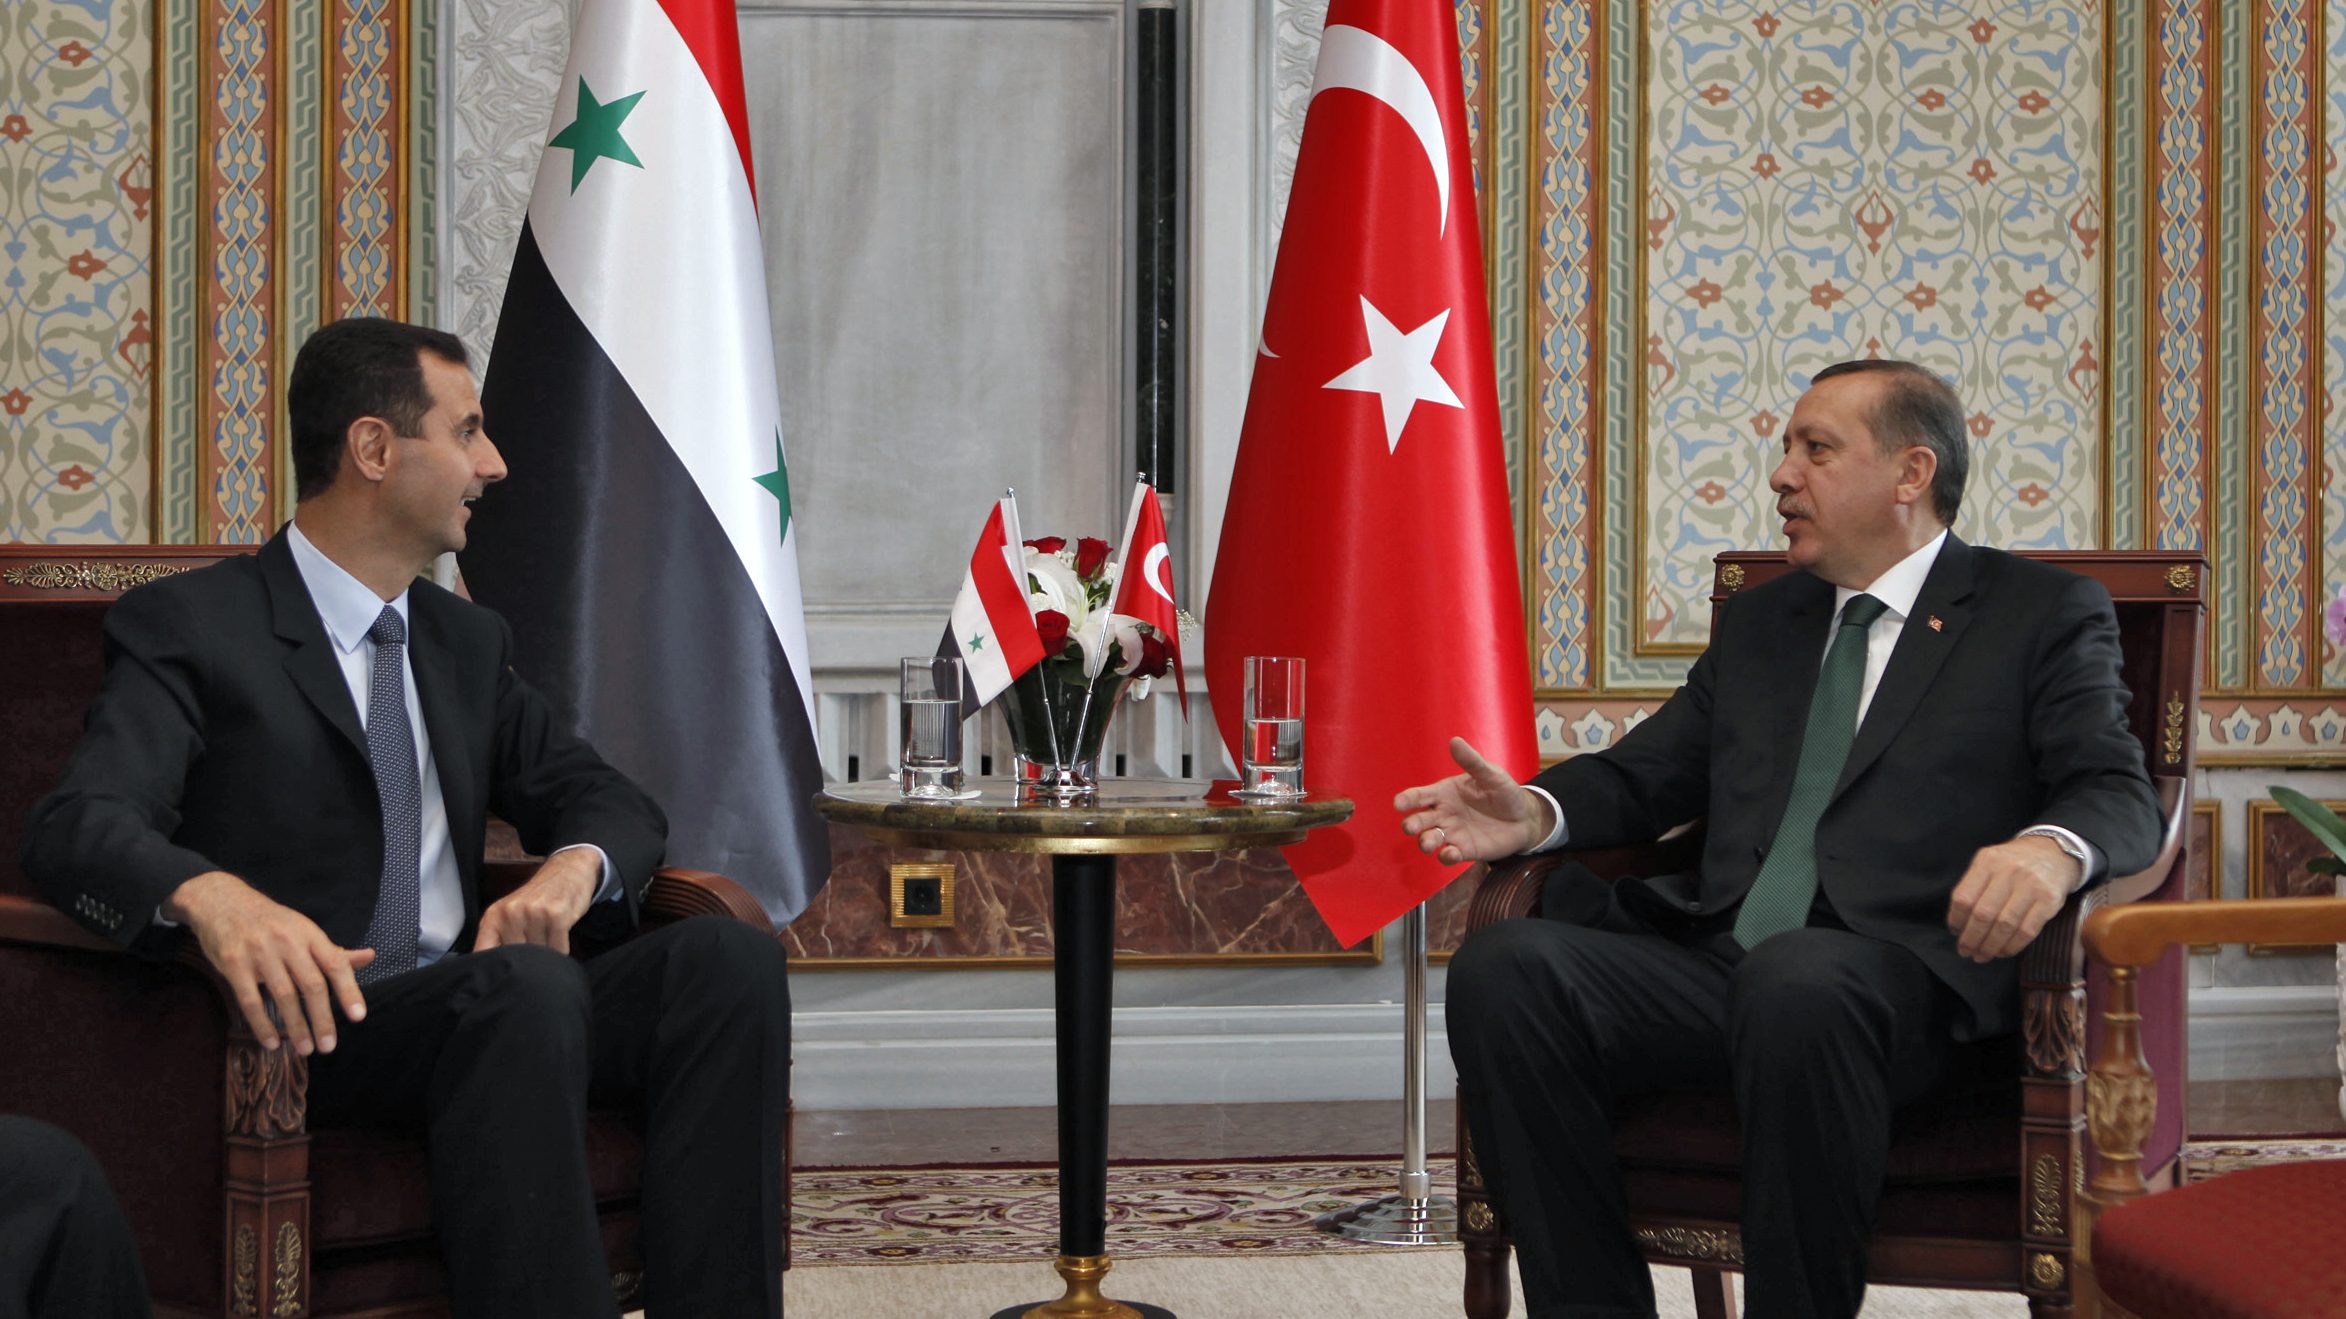 Recap: More on Potential Turkey-Syria Rapprochement